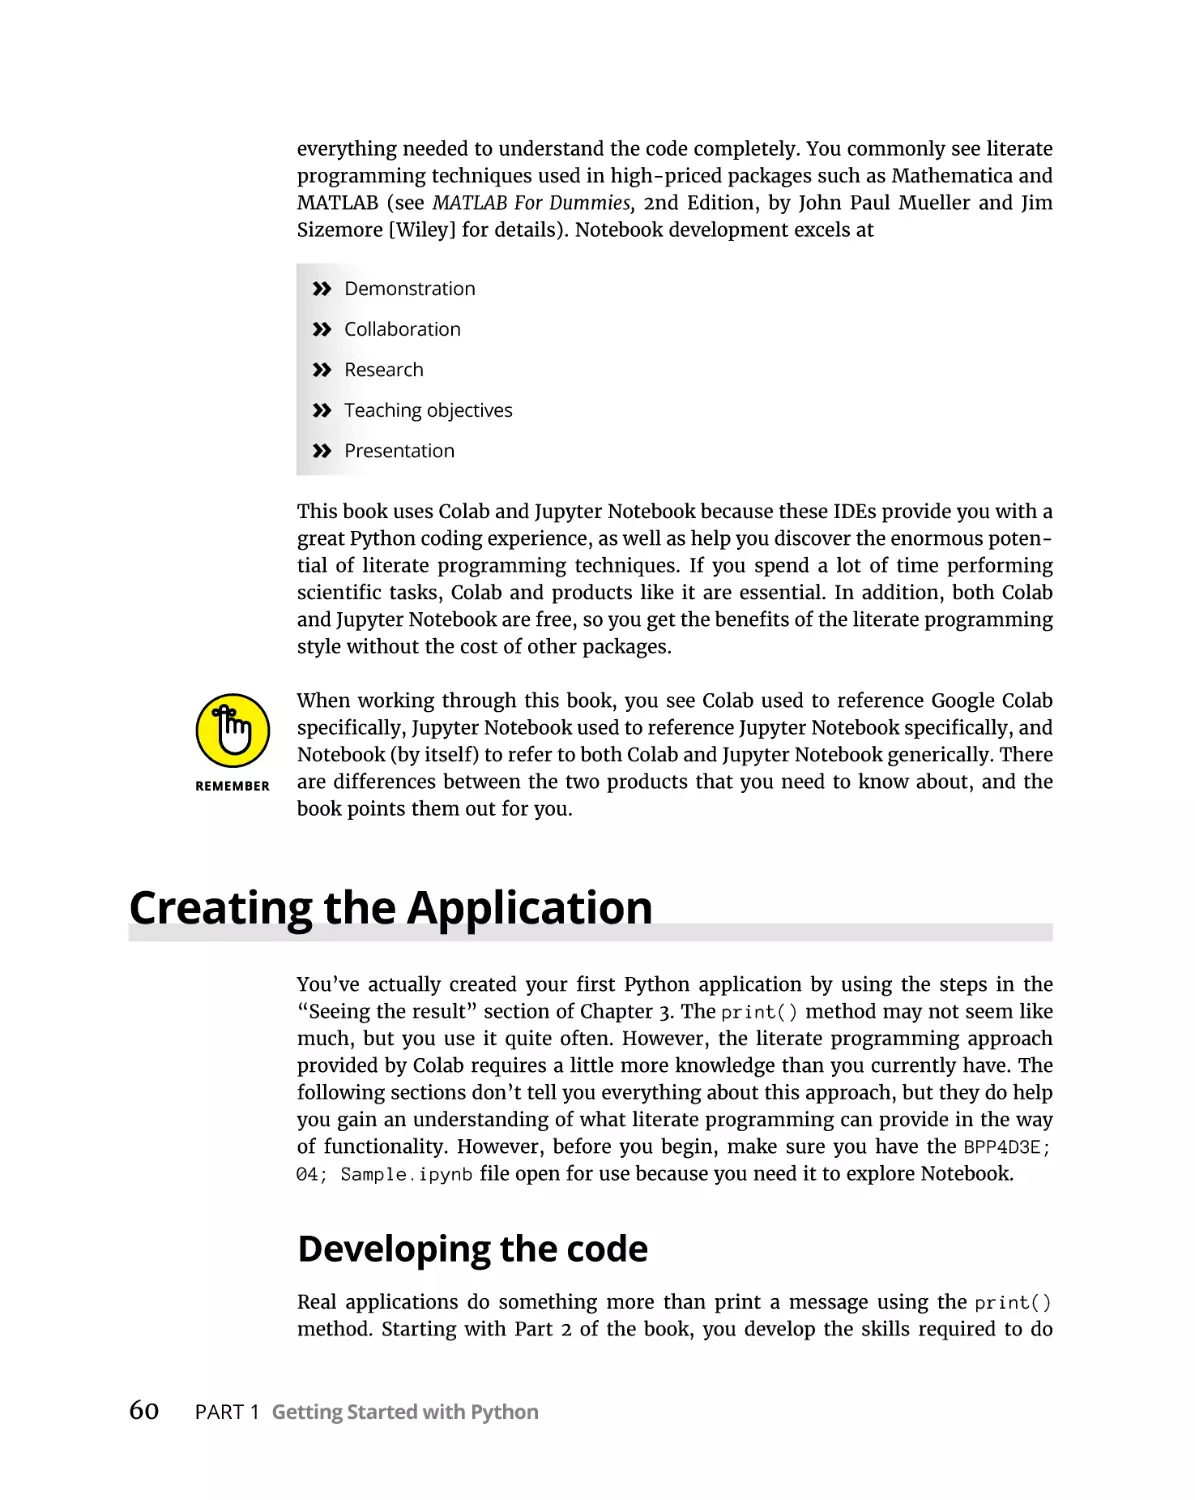 Creating the Application
Developing the code